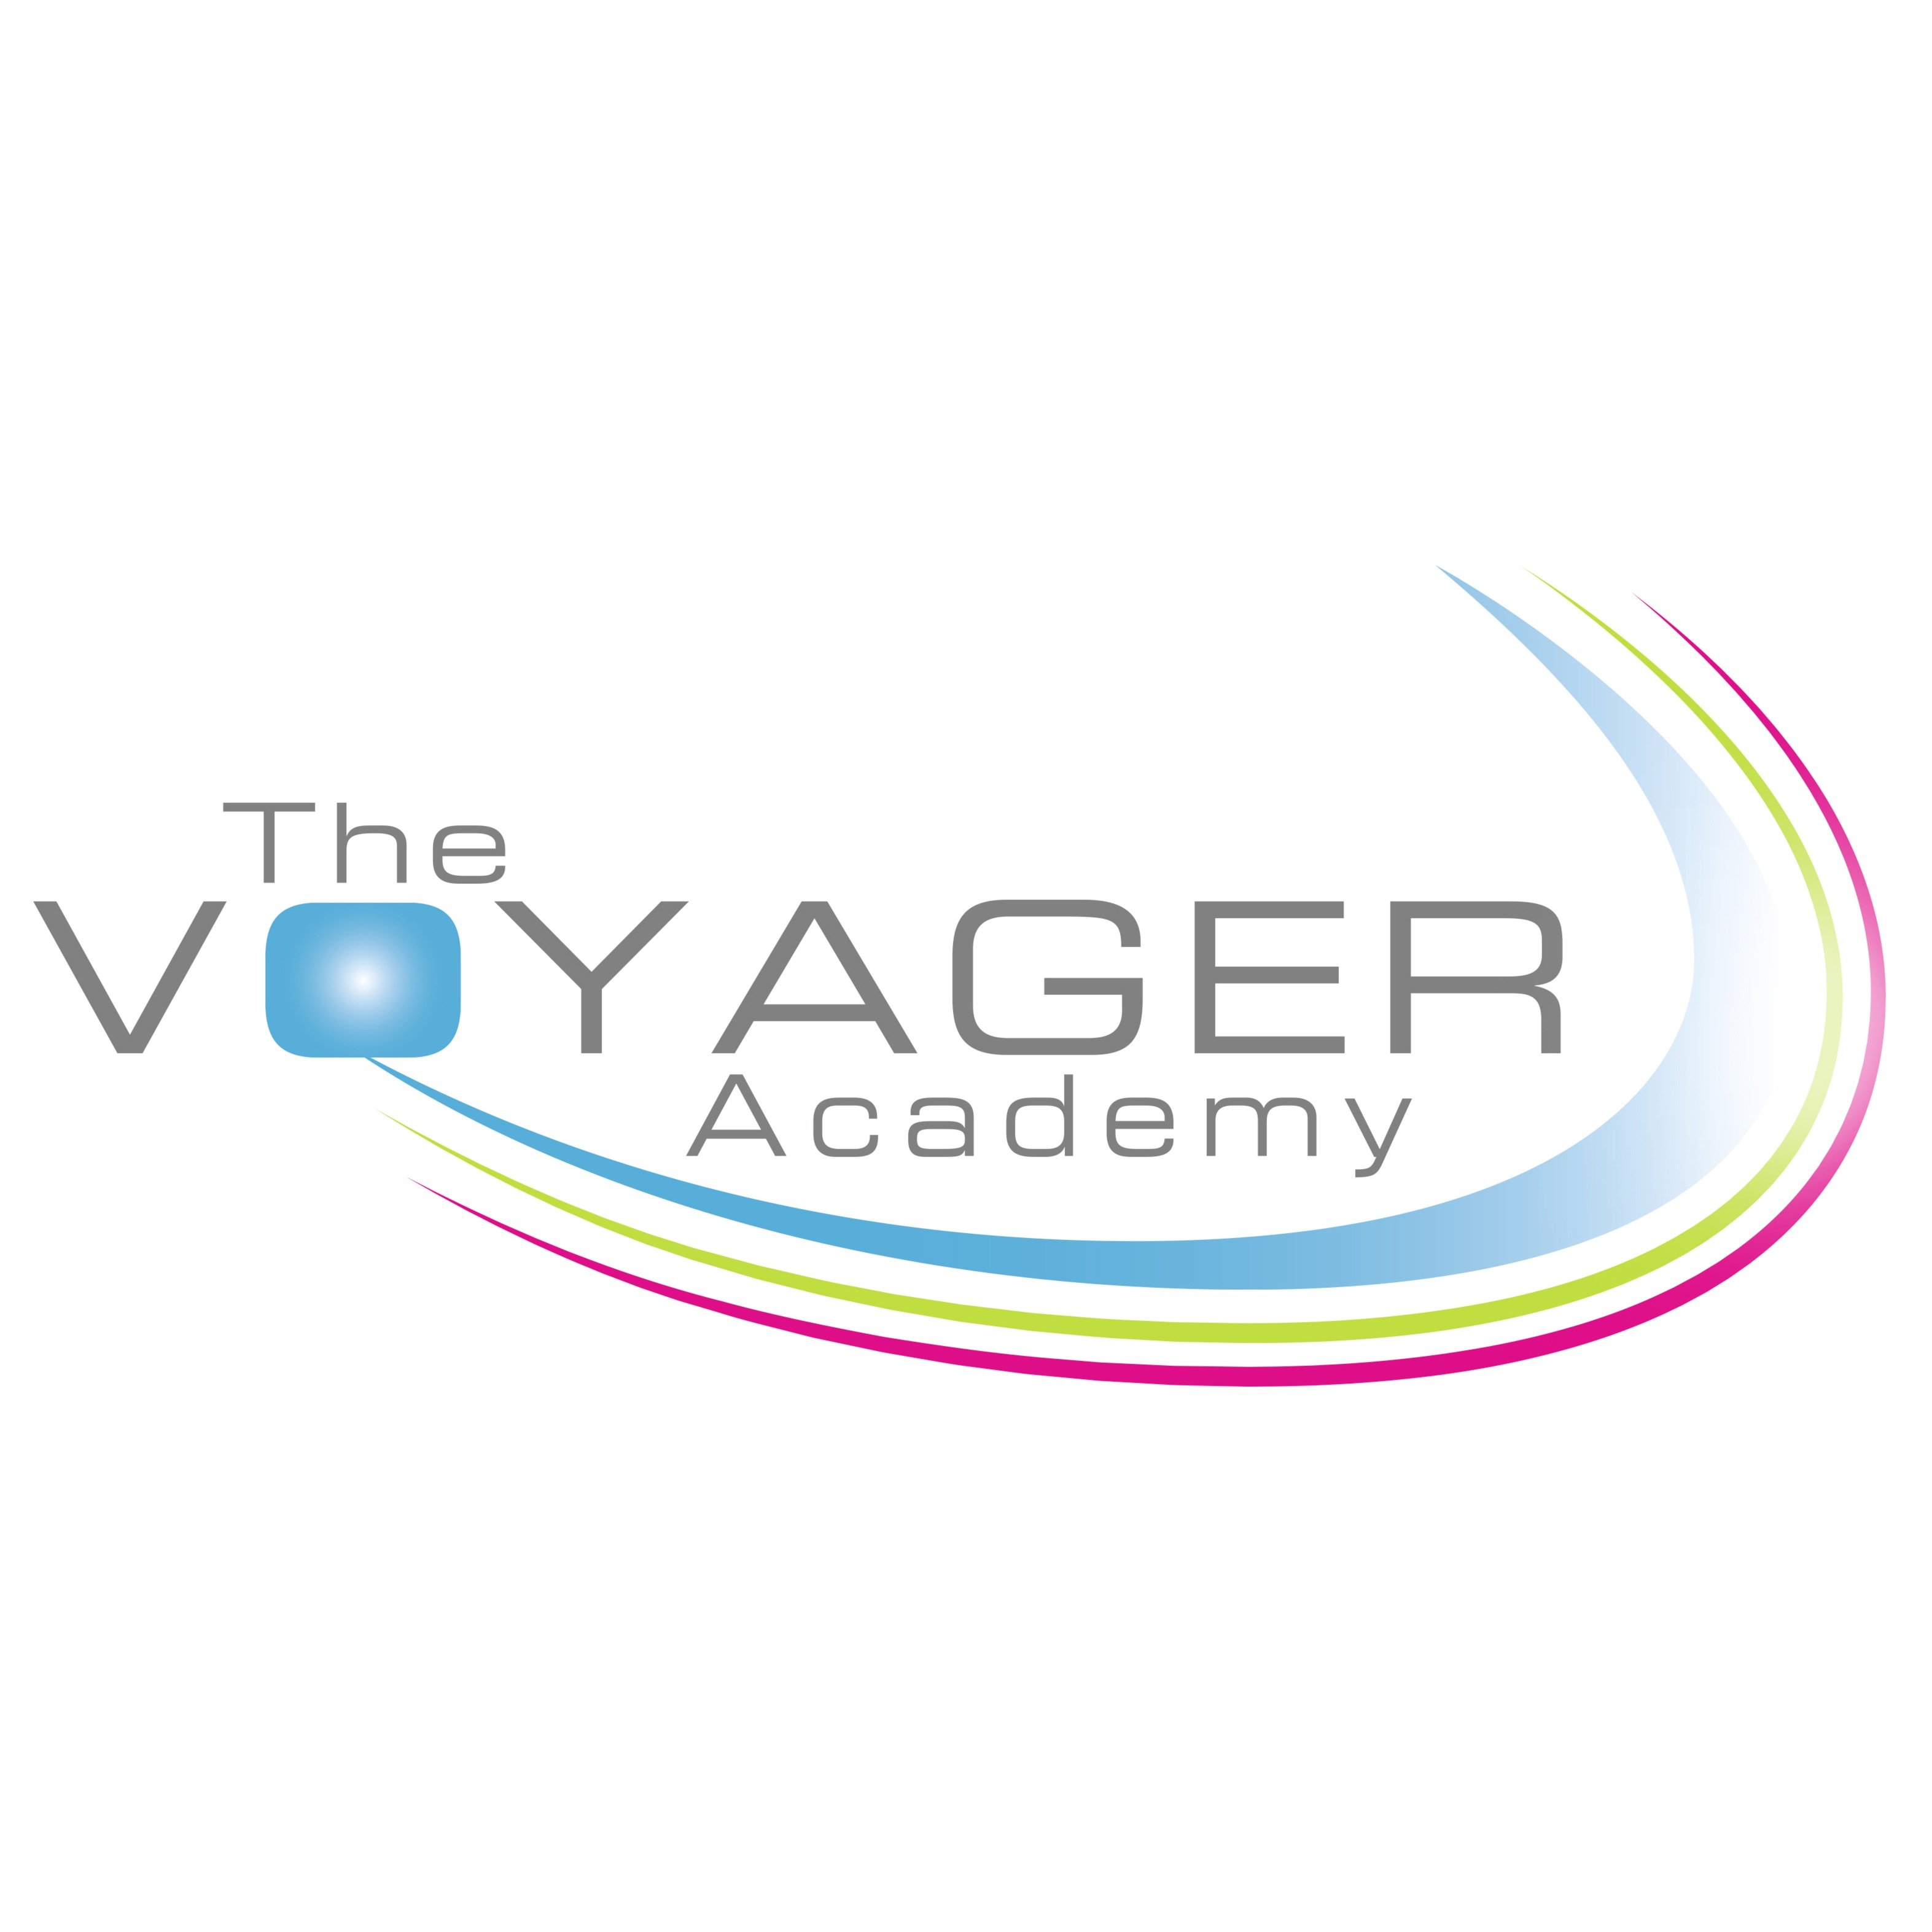 The Voyager Academy